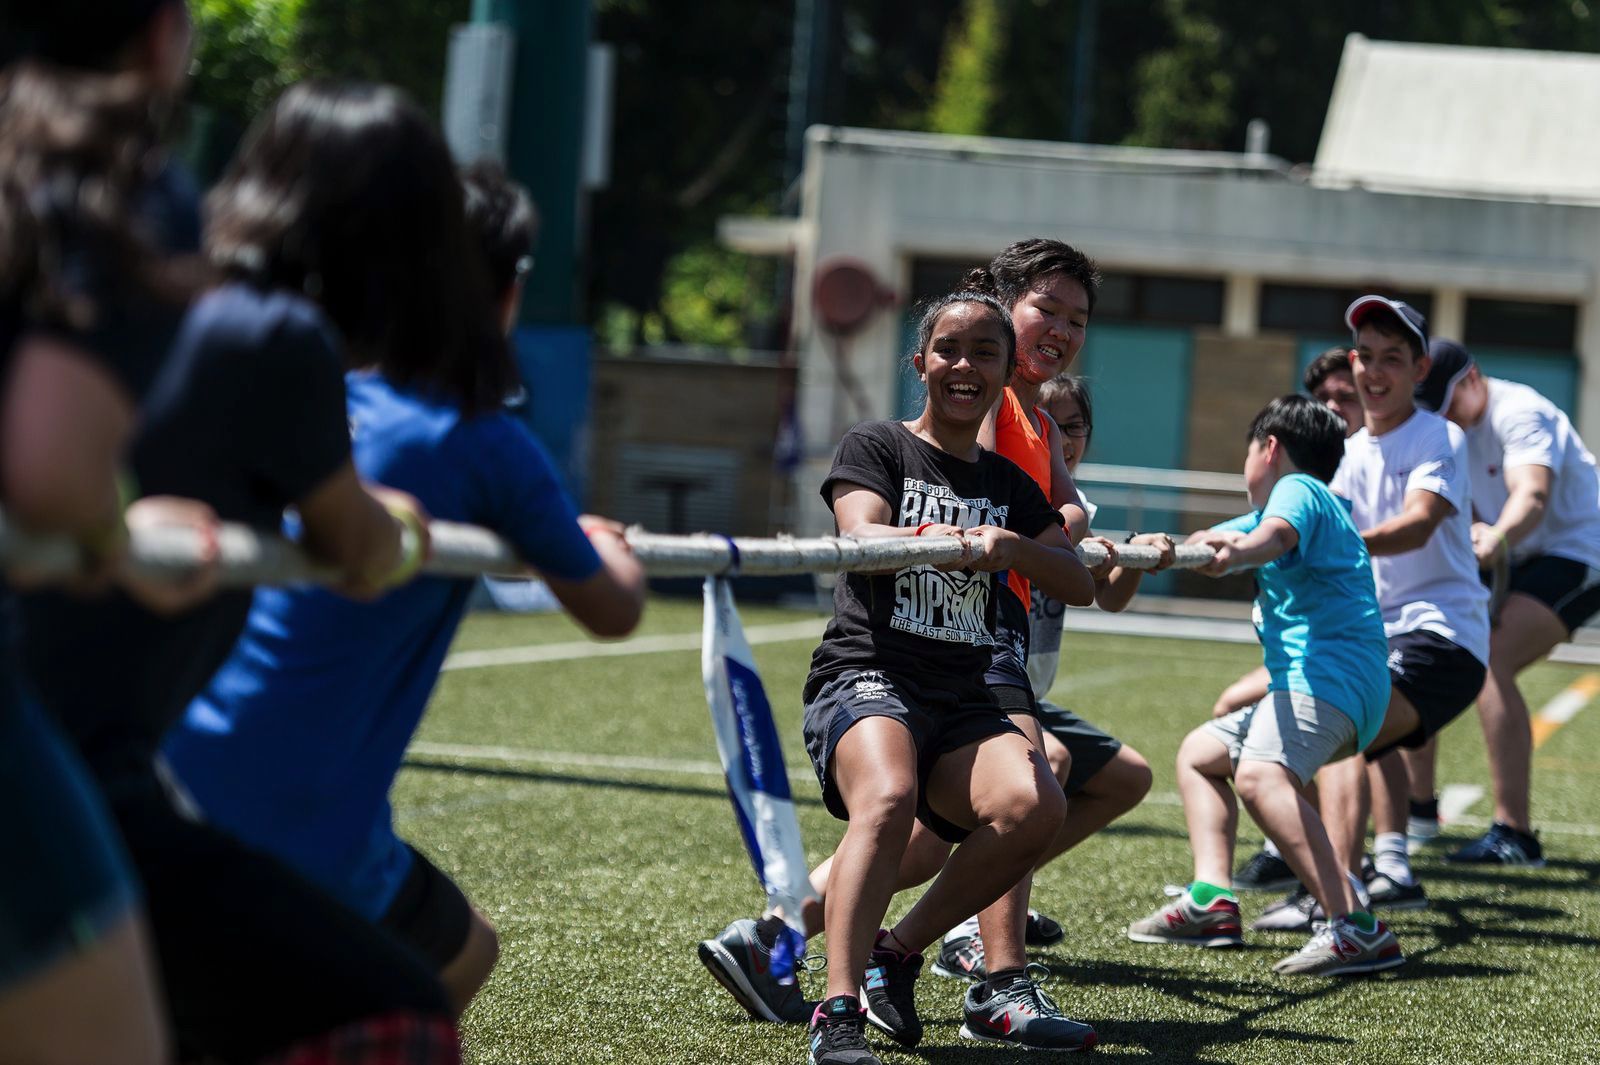 Children participating in team sports at Societe Generale’s Citizen Commitment Day